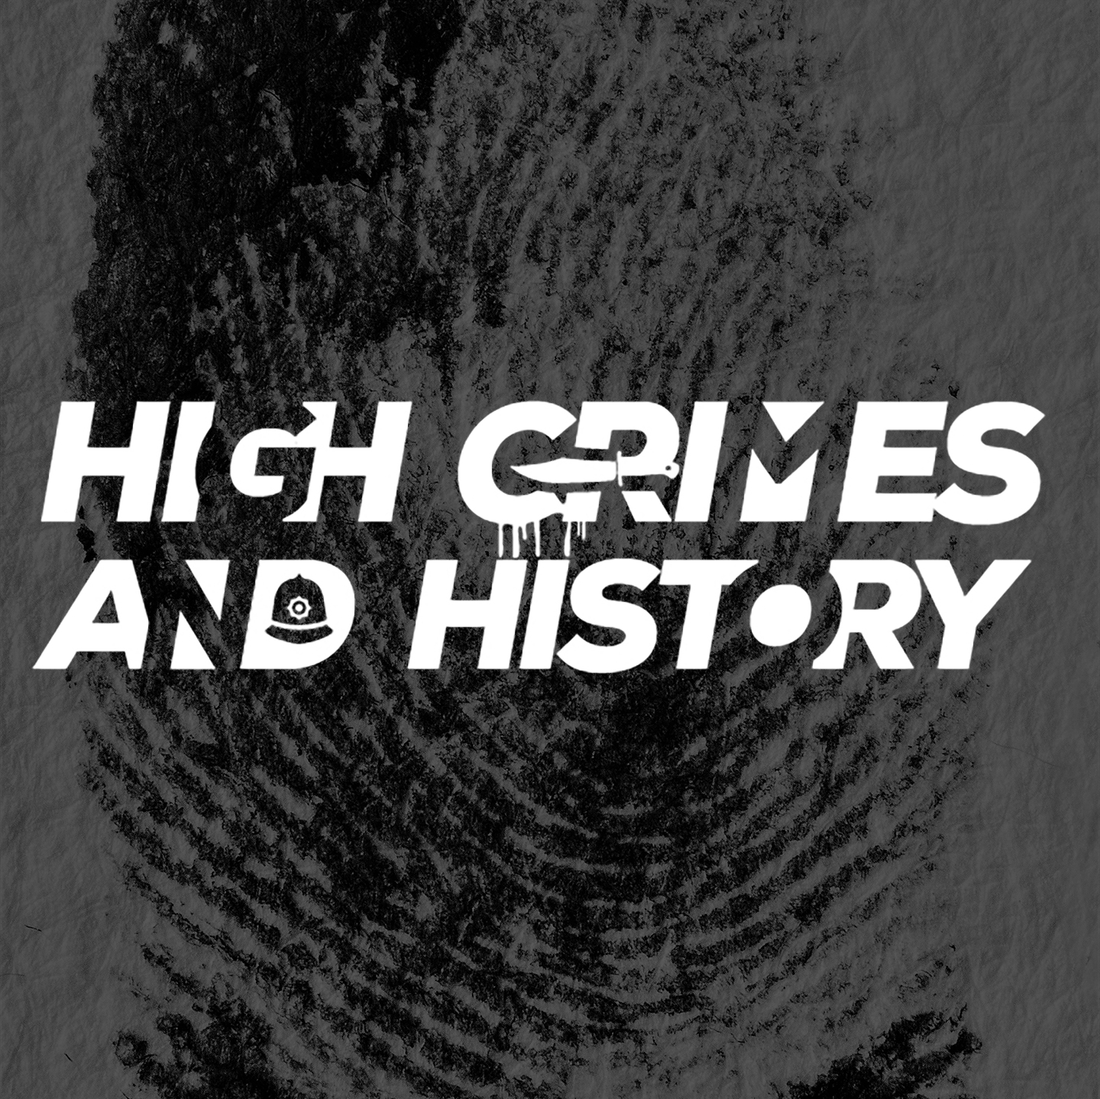 Army Flashcards Sponsors High Crime and History Podcast